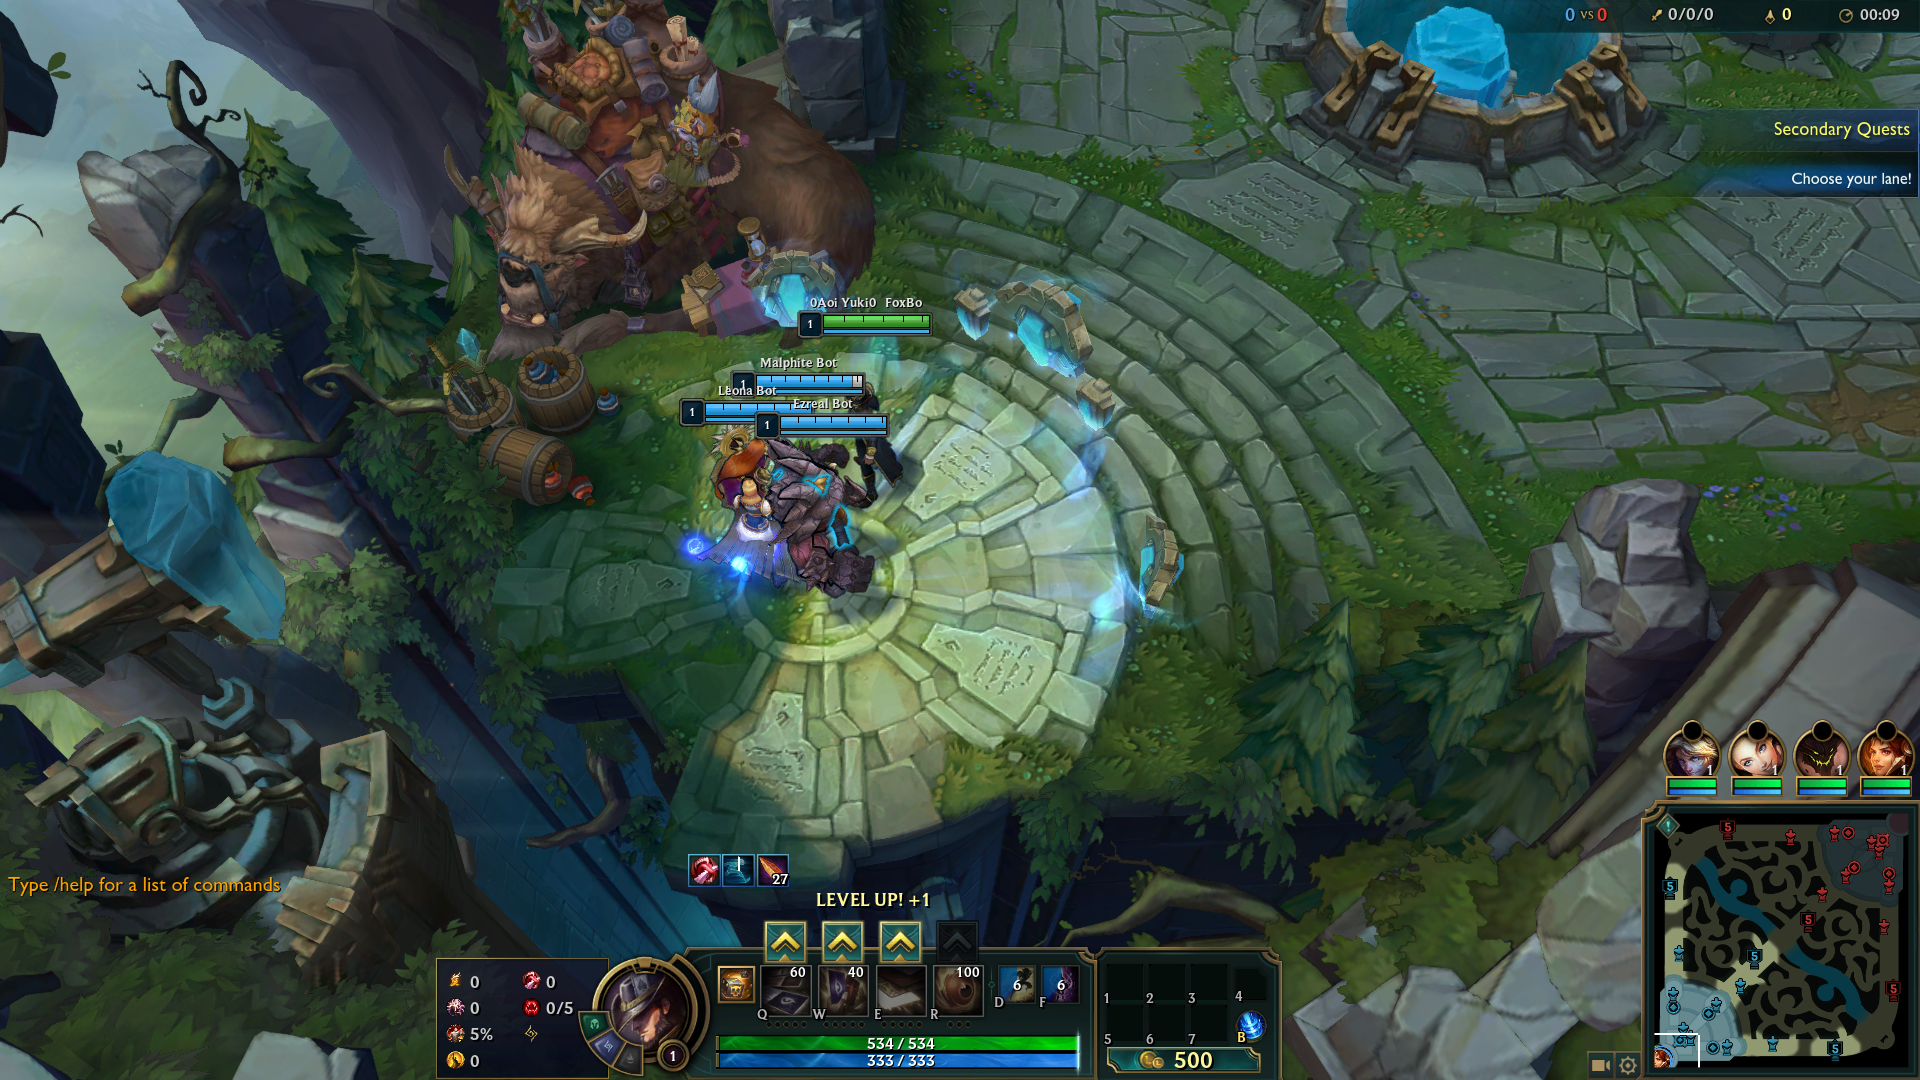 Gameplay image from League of Legends